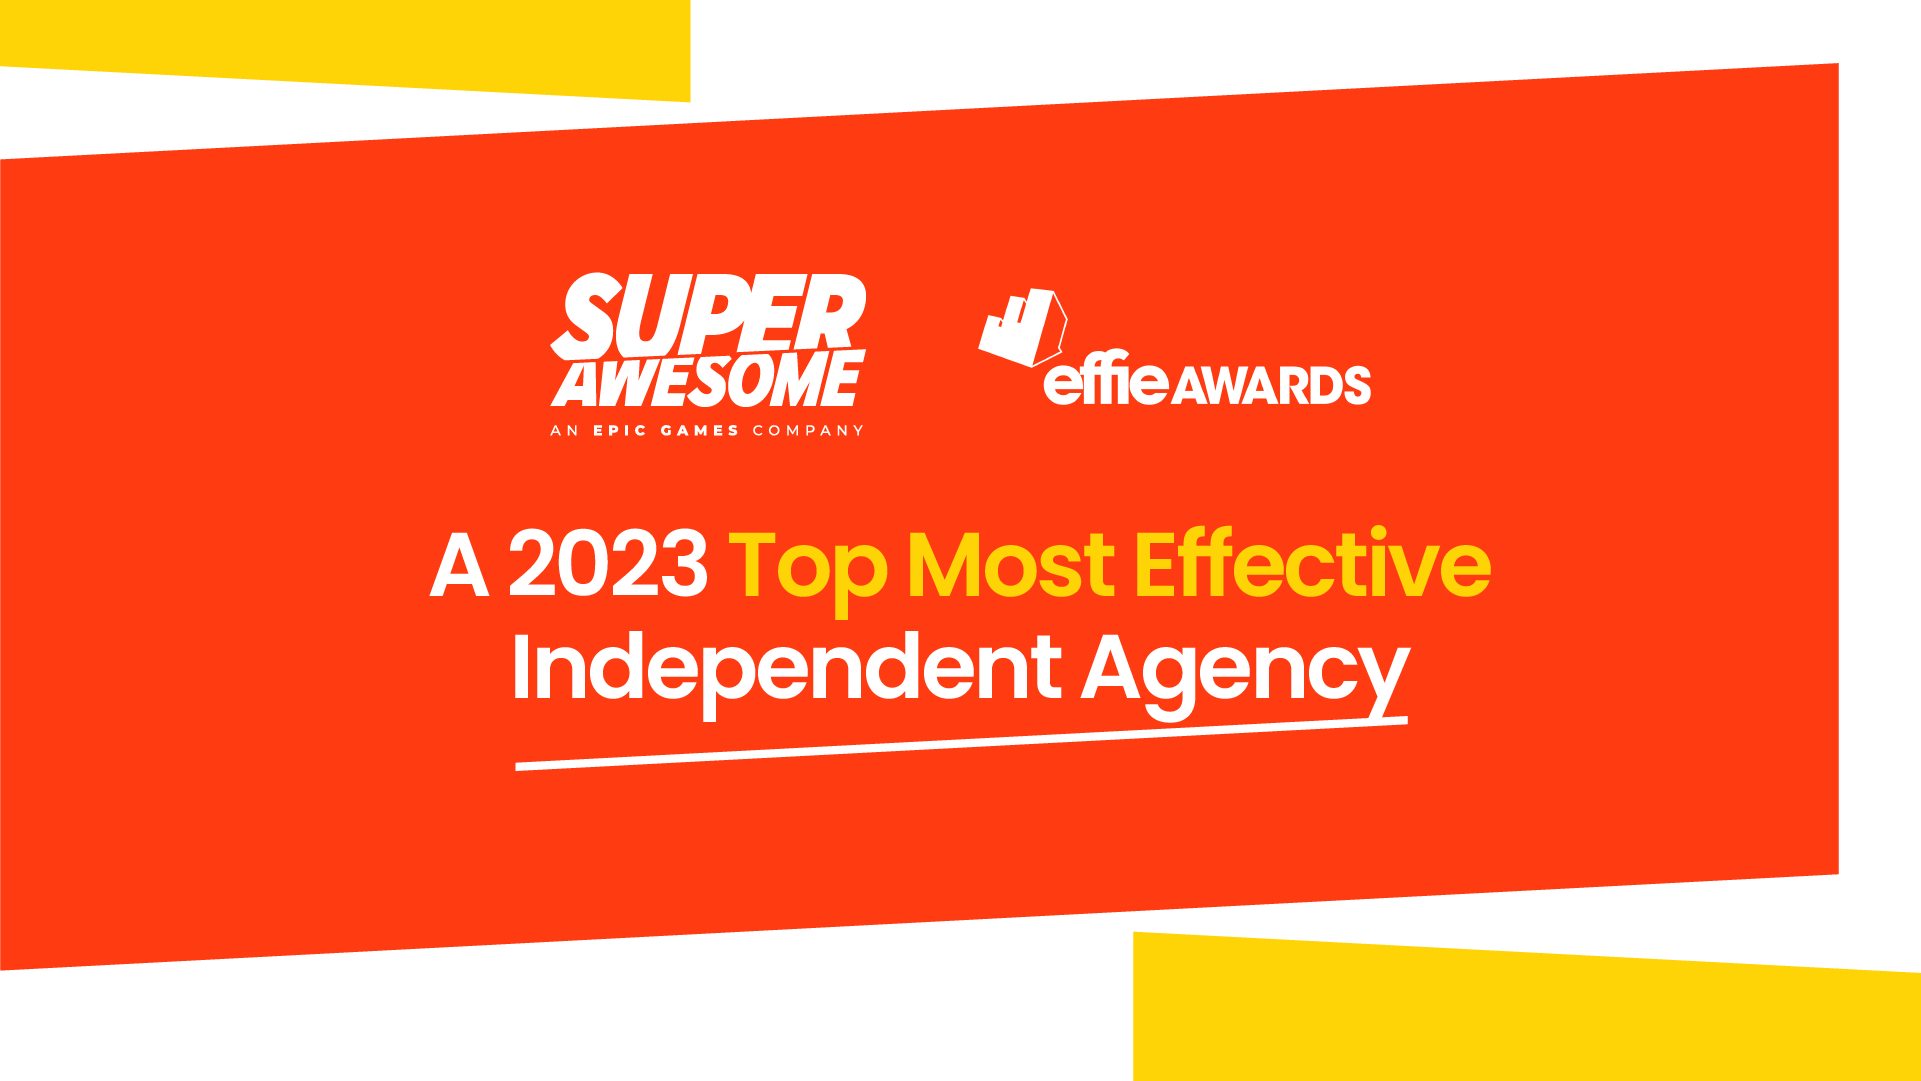 SuperAwesome Named a Top 3 Most Effective Independent Agency by the Effie Awards